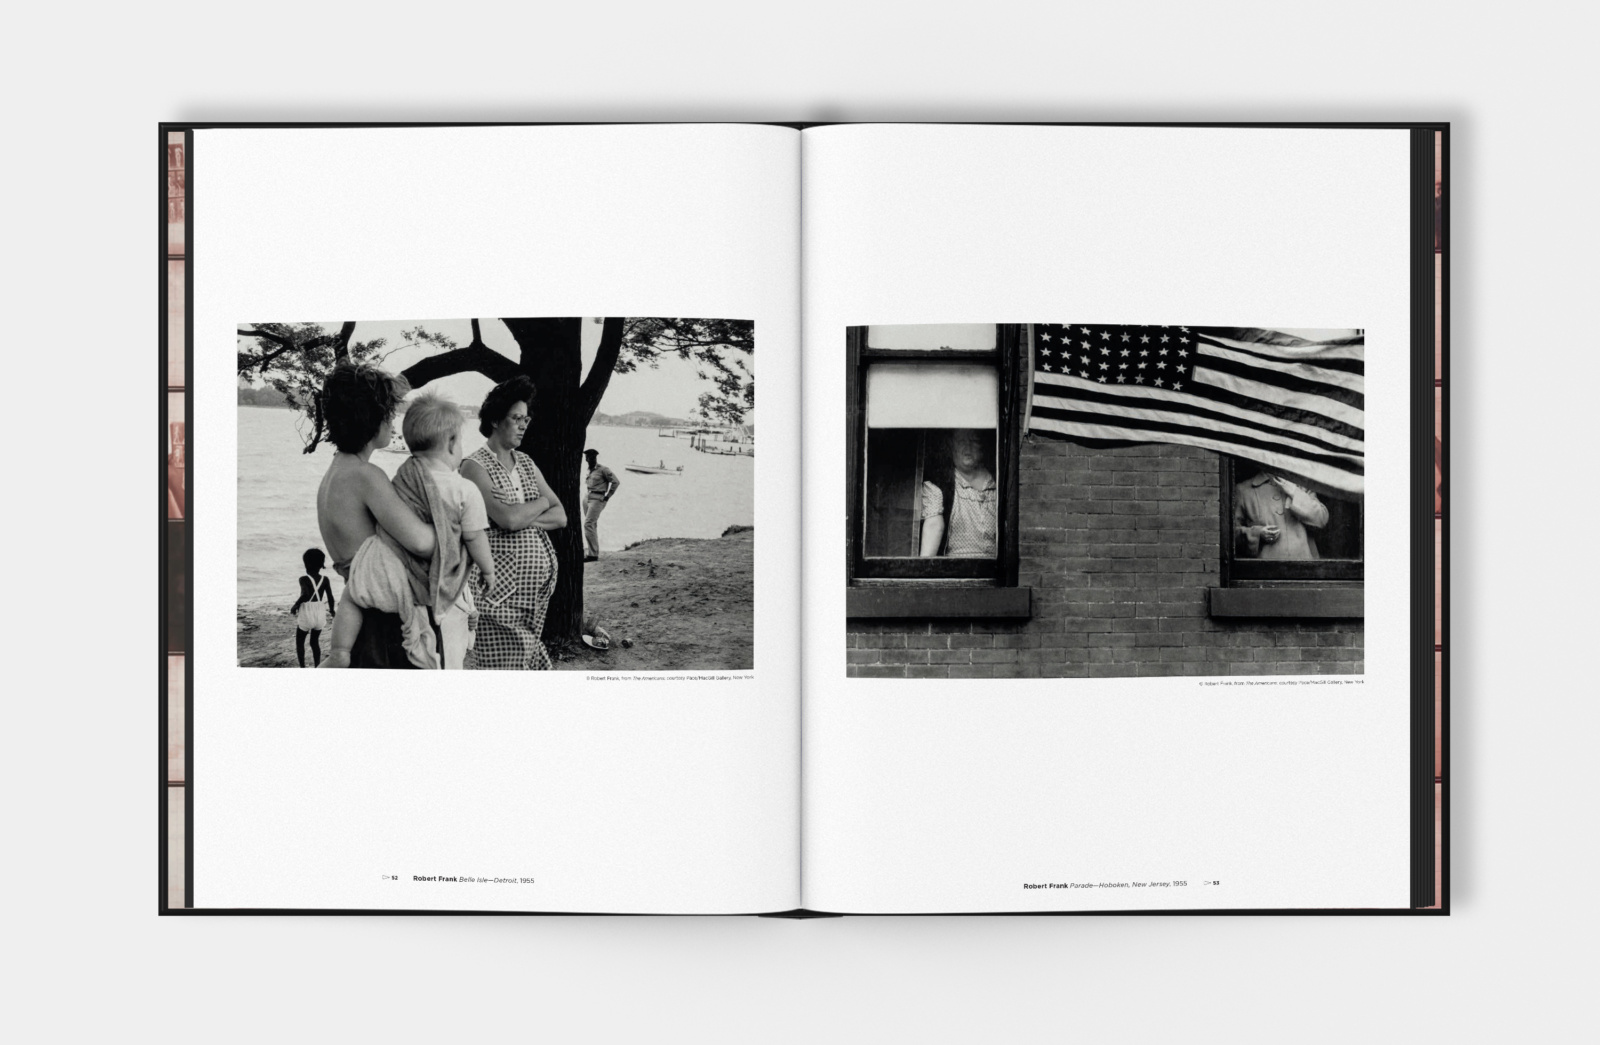 PROOF book design spread, showing two chosen frames from Robert Franks's "The Americans"